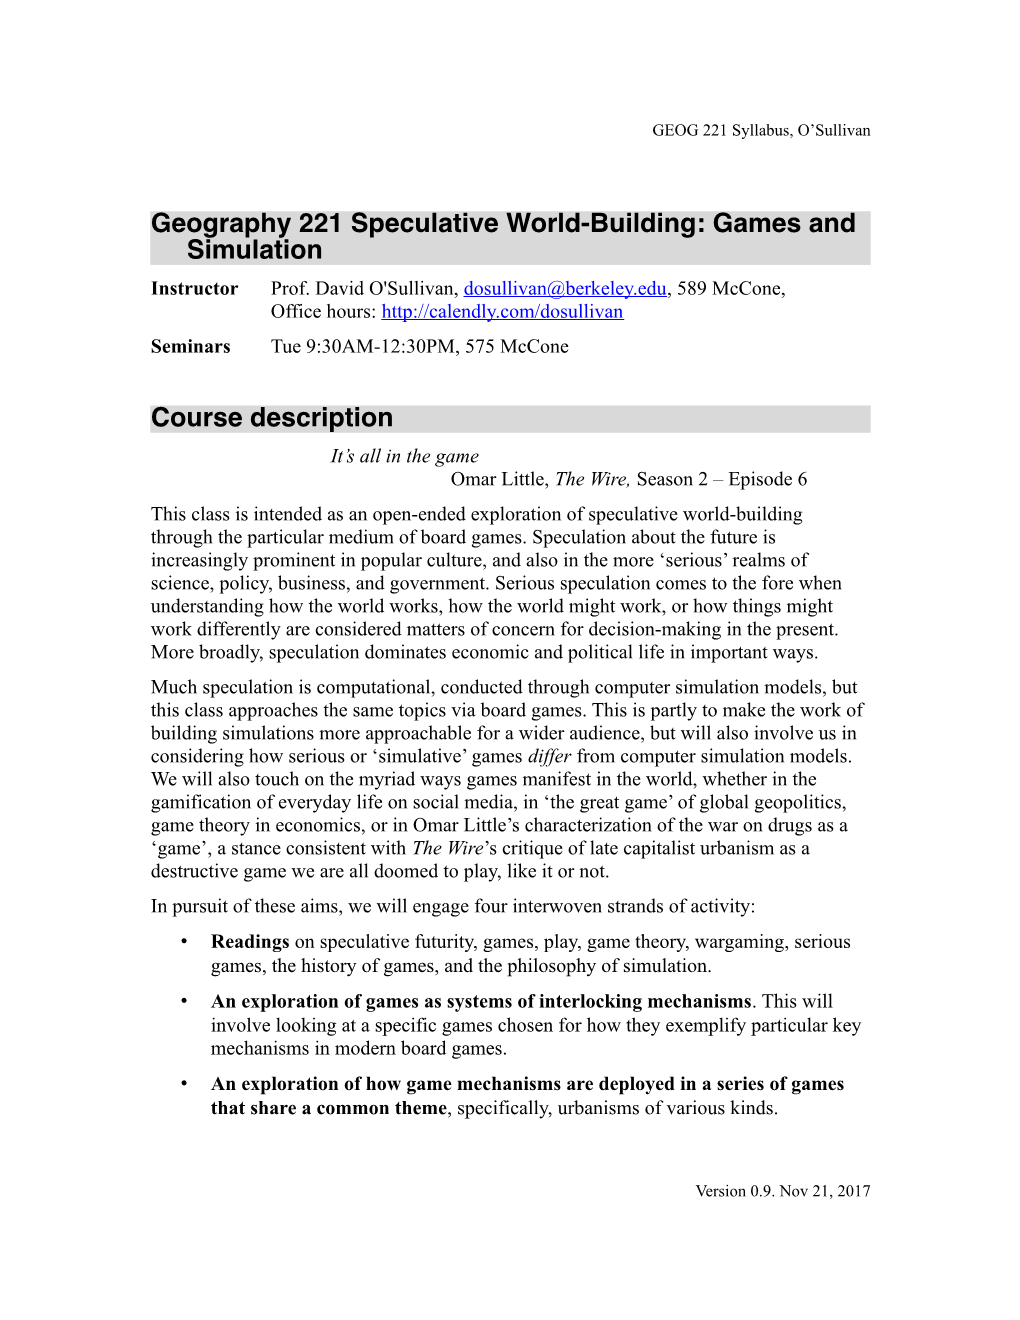 Geography 221 Speculative World-Building: Games and Simulation Instructor Prof